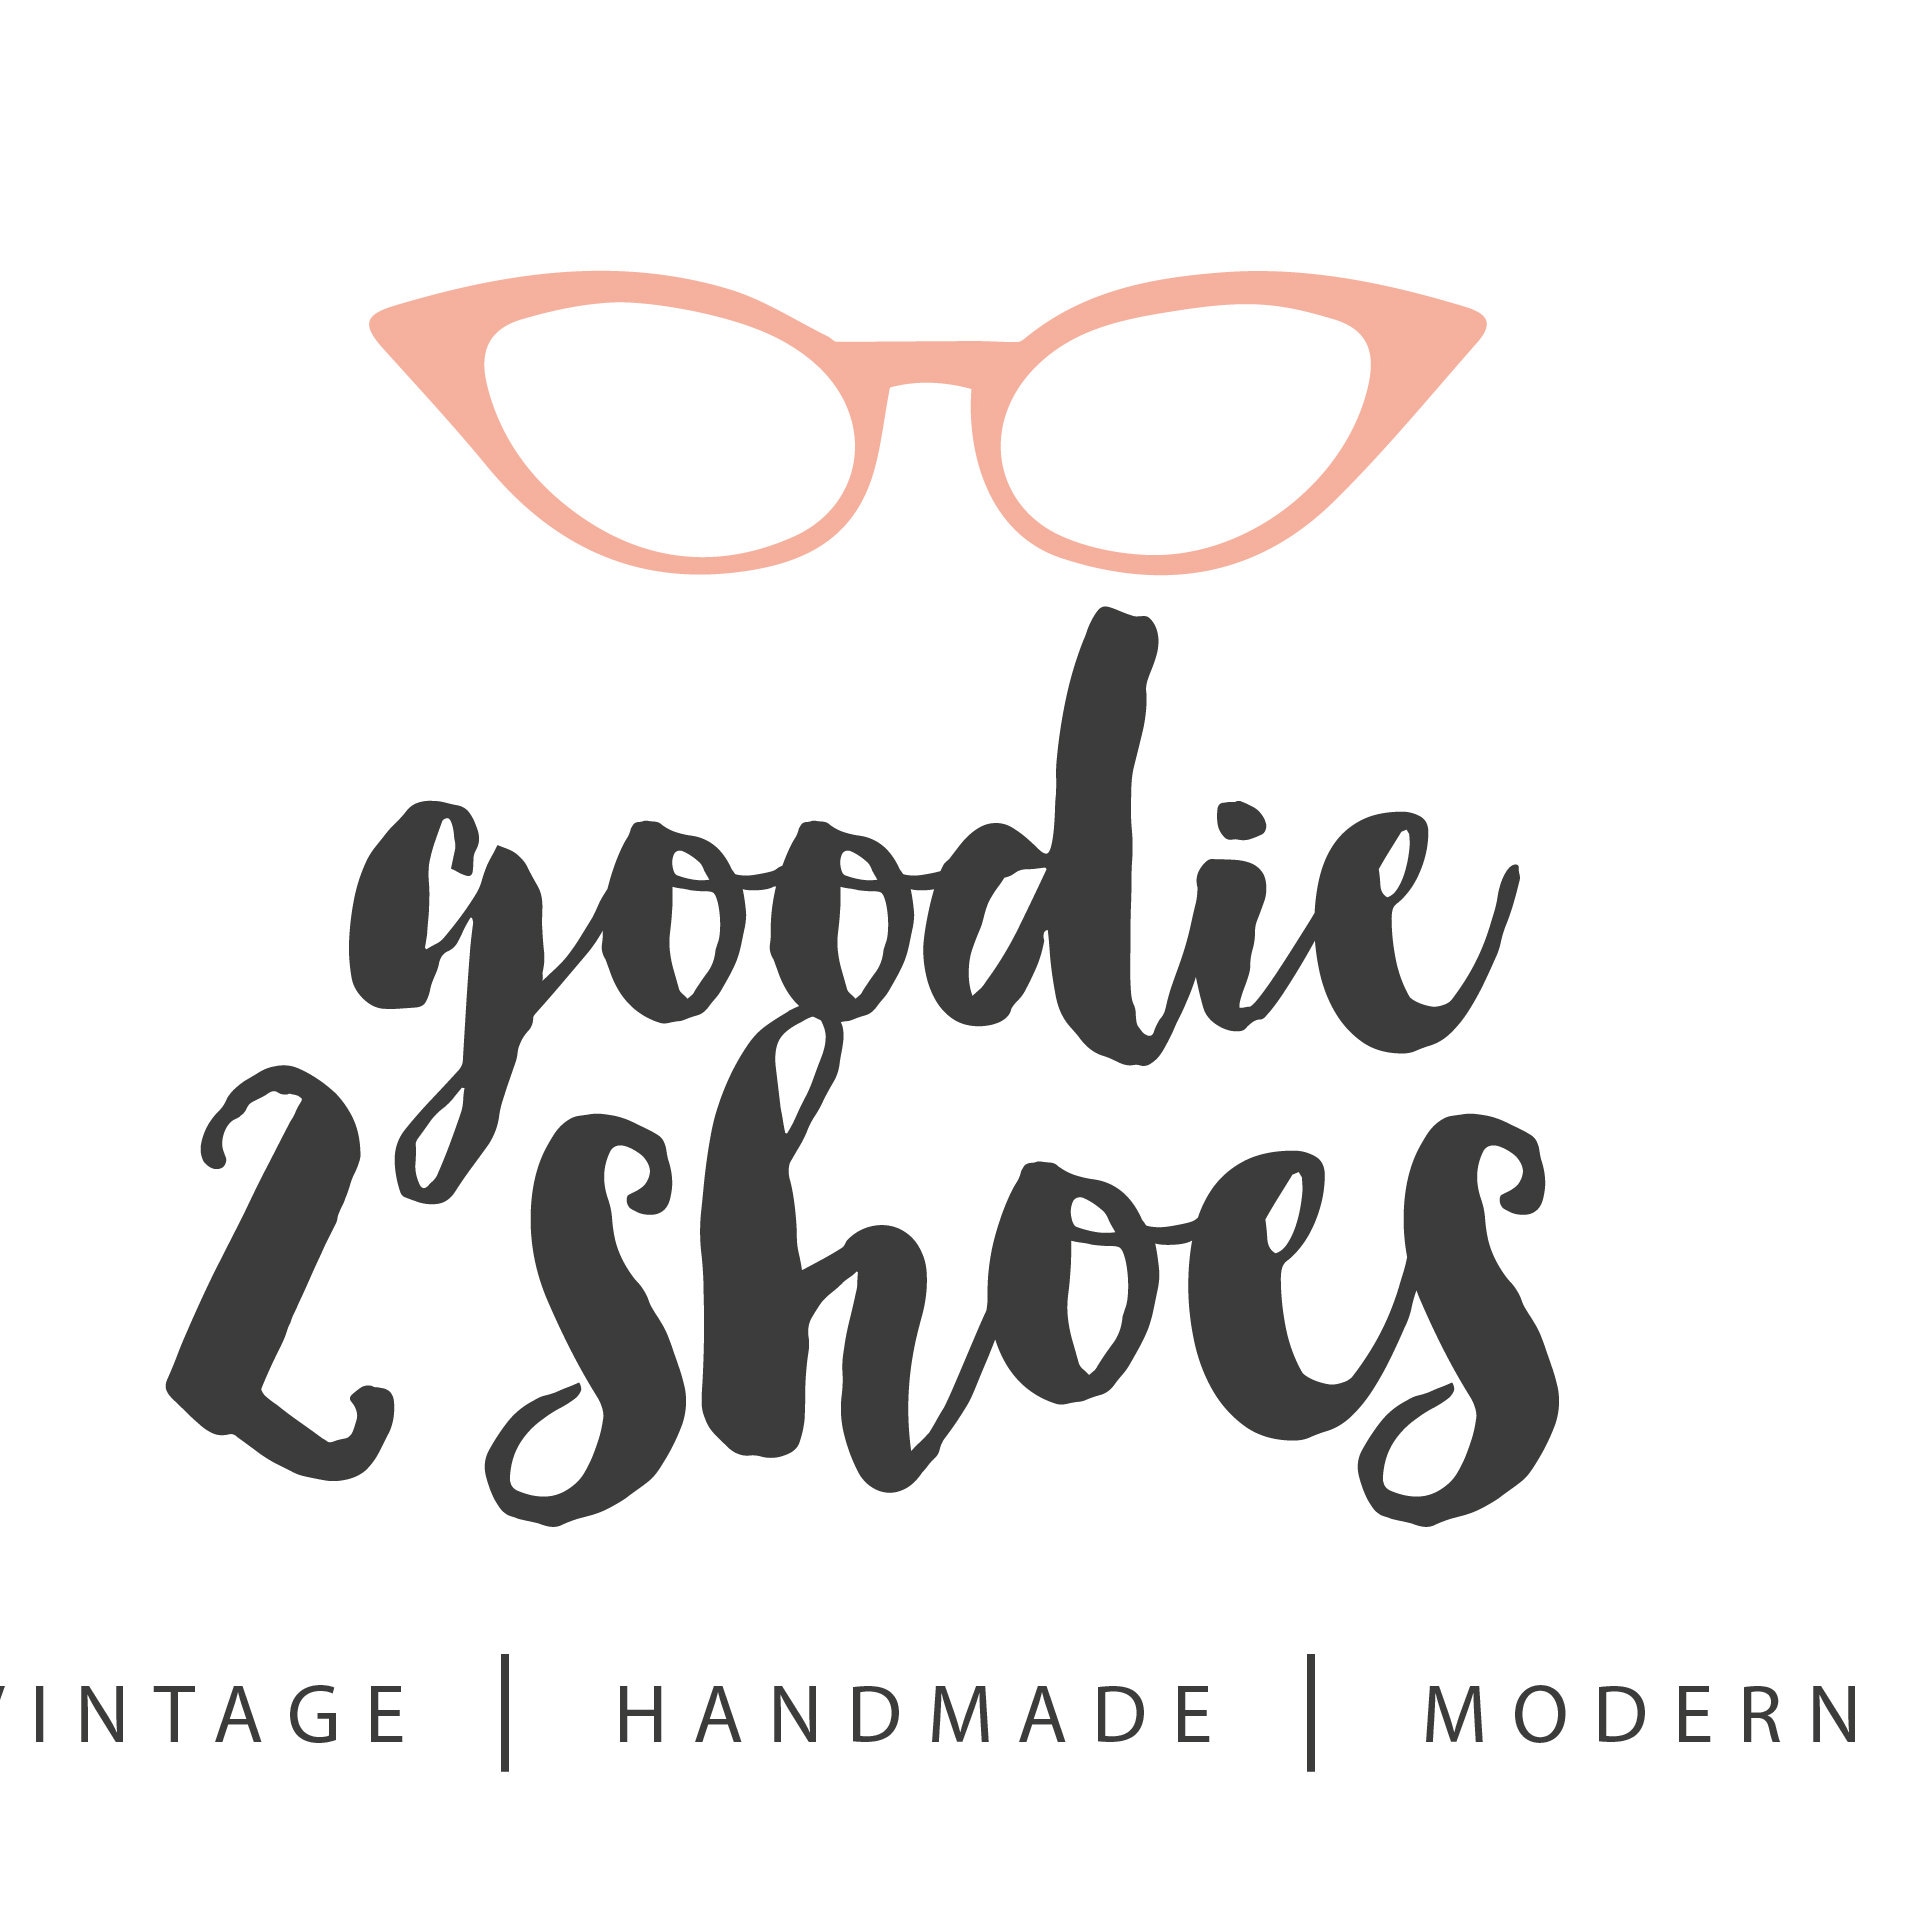 Goodie2ShoesVintage - Etsy